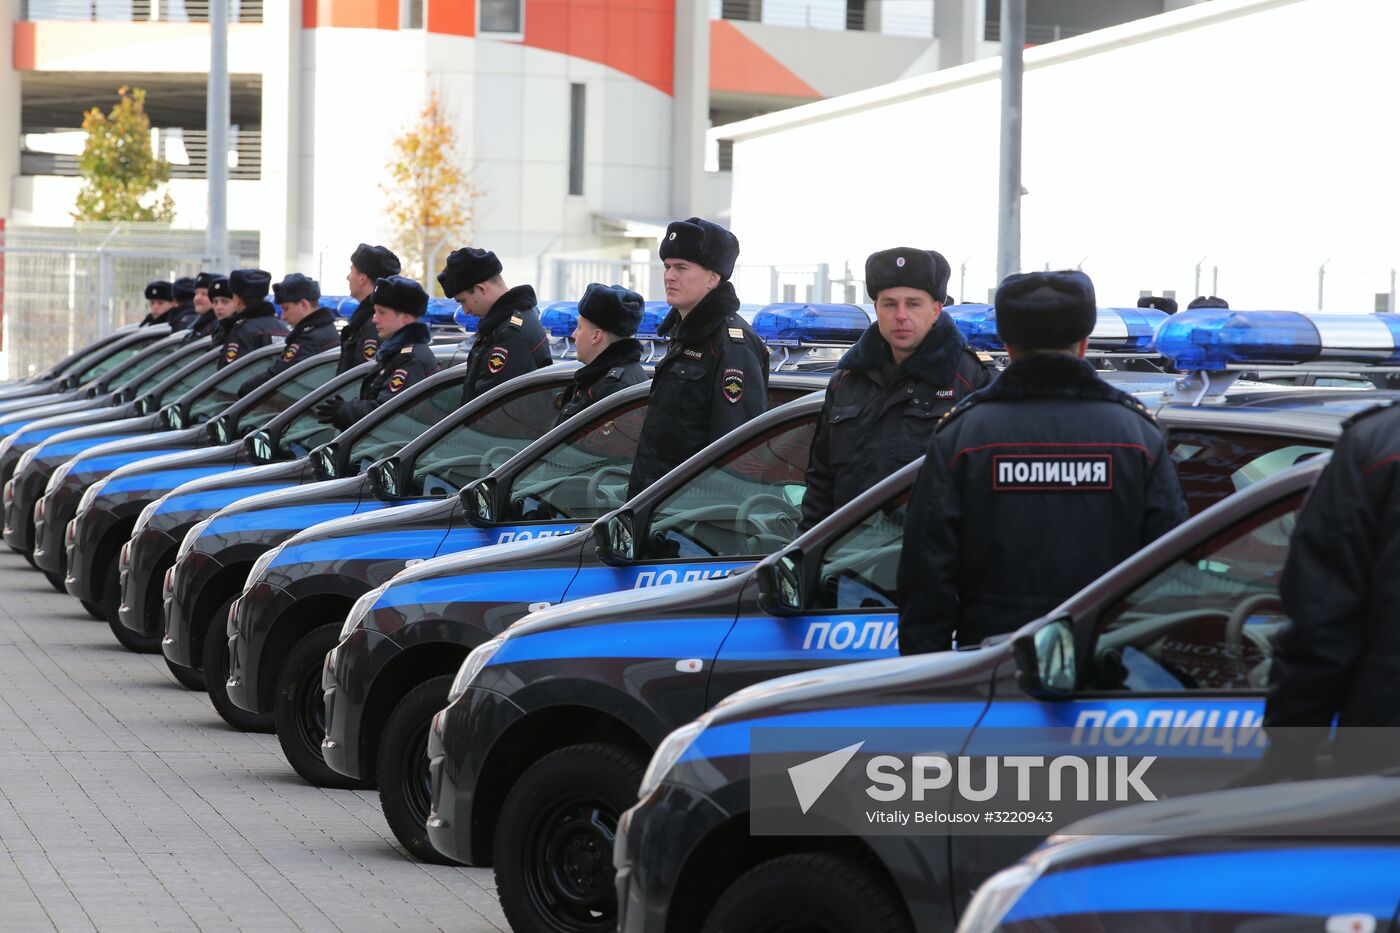 Transferring patrol cars to extra-departmental security units